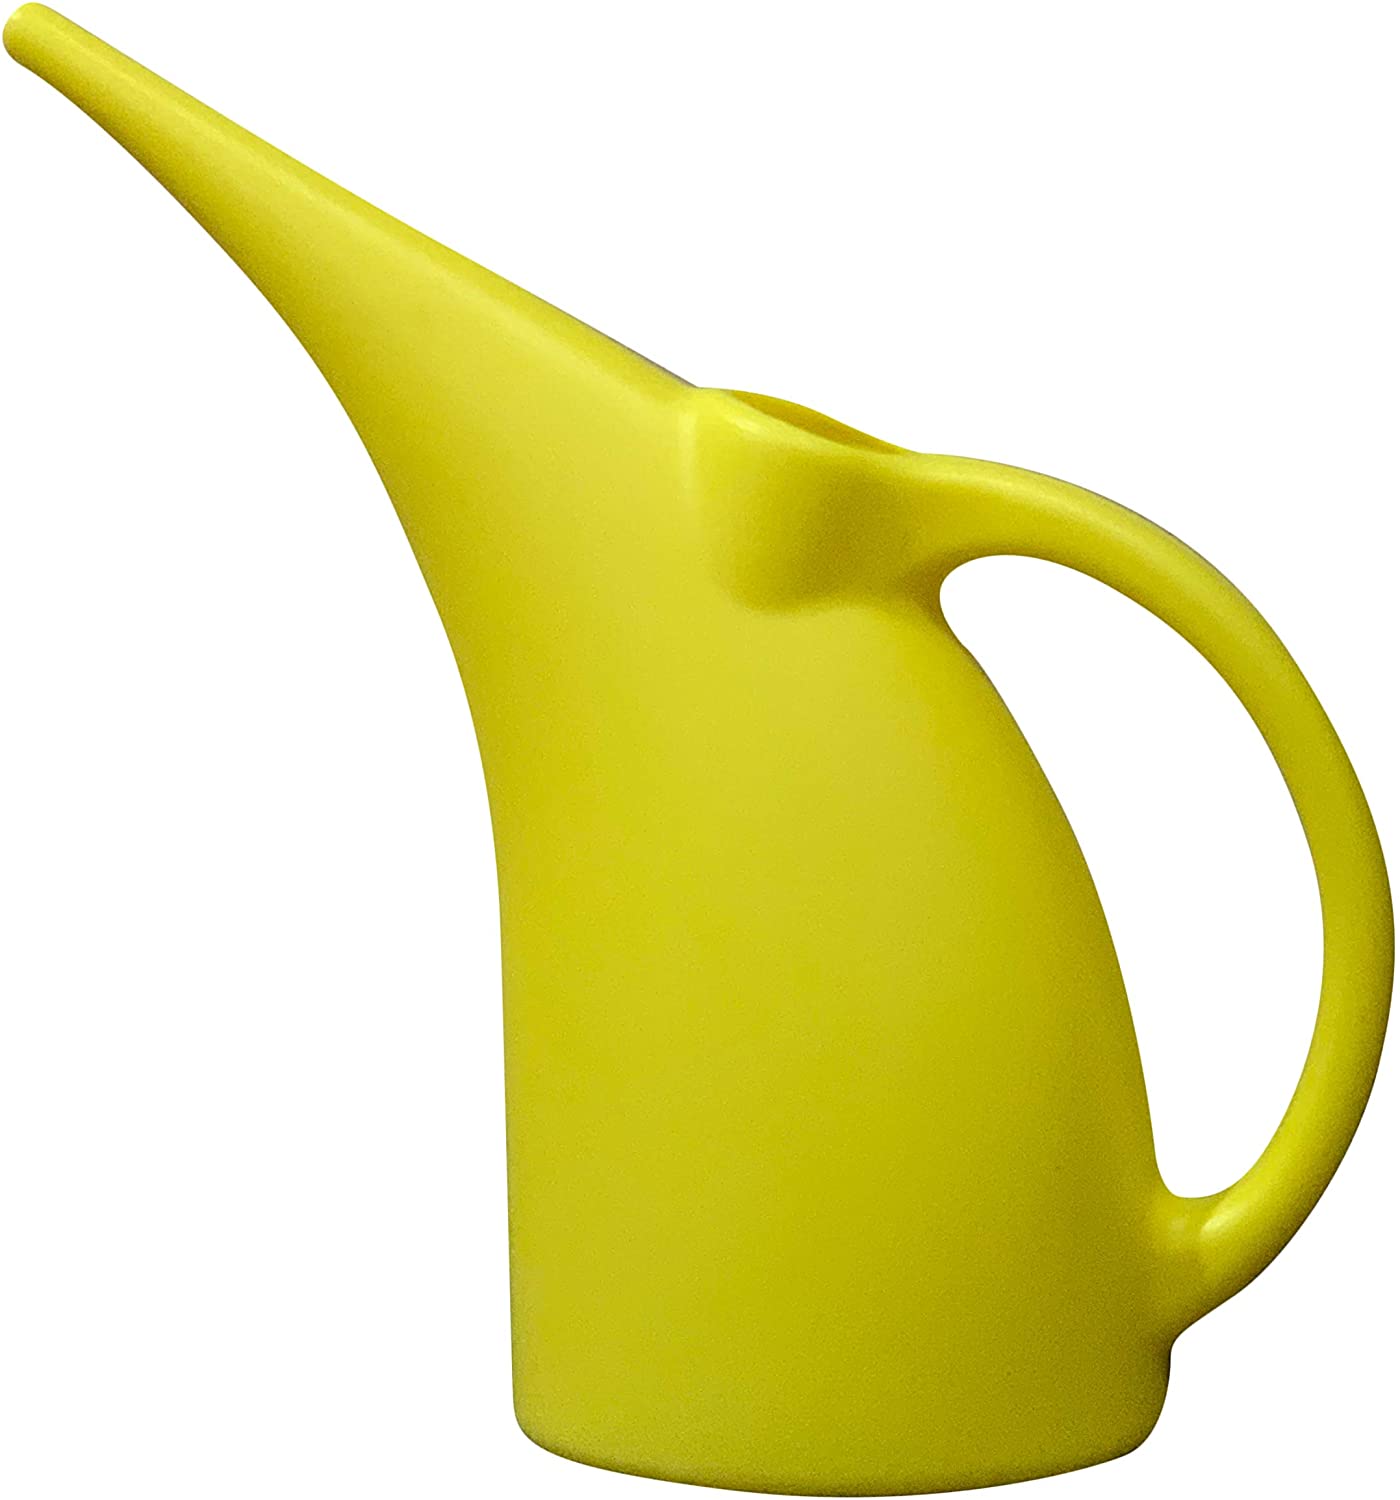 Kool Products Watering Can Indoor Small Indoor Watering Cans for House Plants Mini Plant Watering Cans Plastic Watering Cans (1 Pack) 1/2 Gallon Plant Watering Can BPA Free (Yellow) 12.99 freeshipping - Kool Products